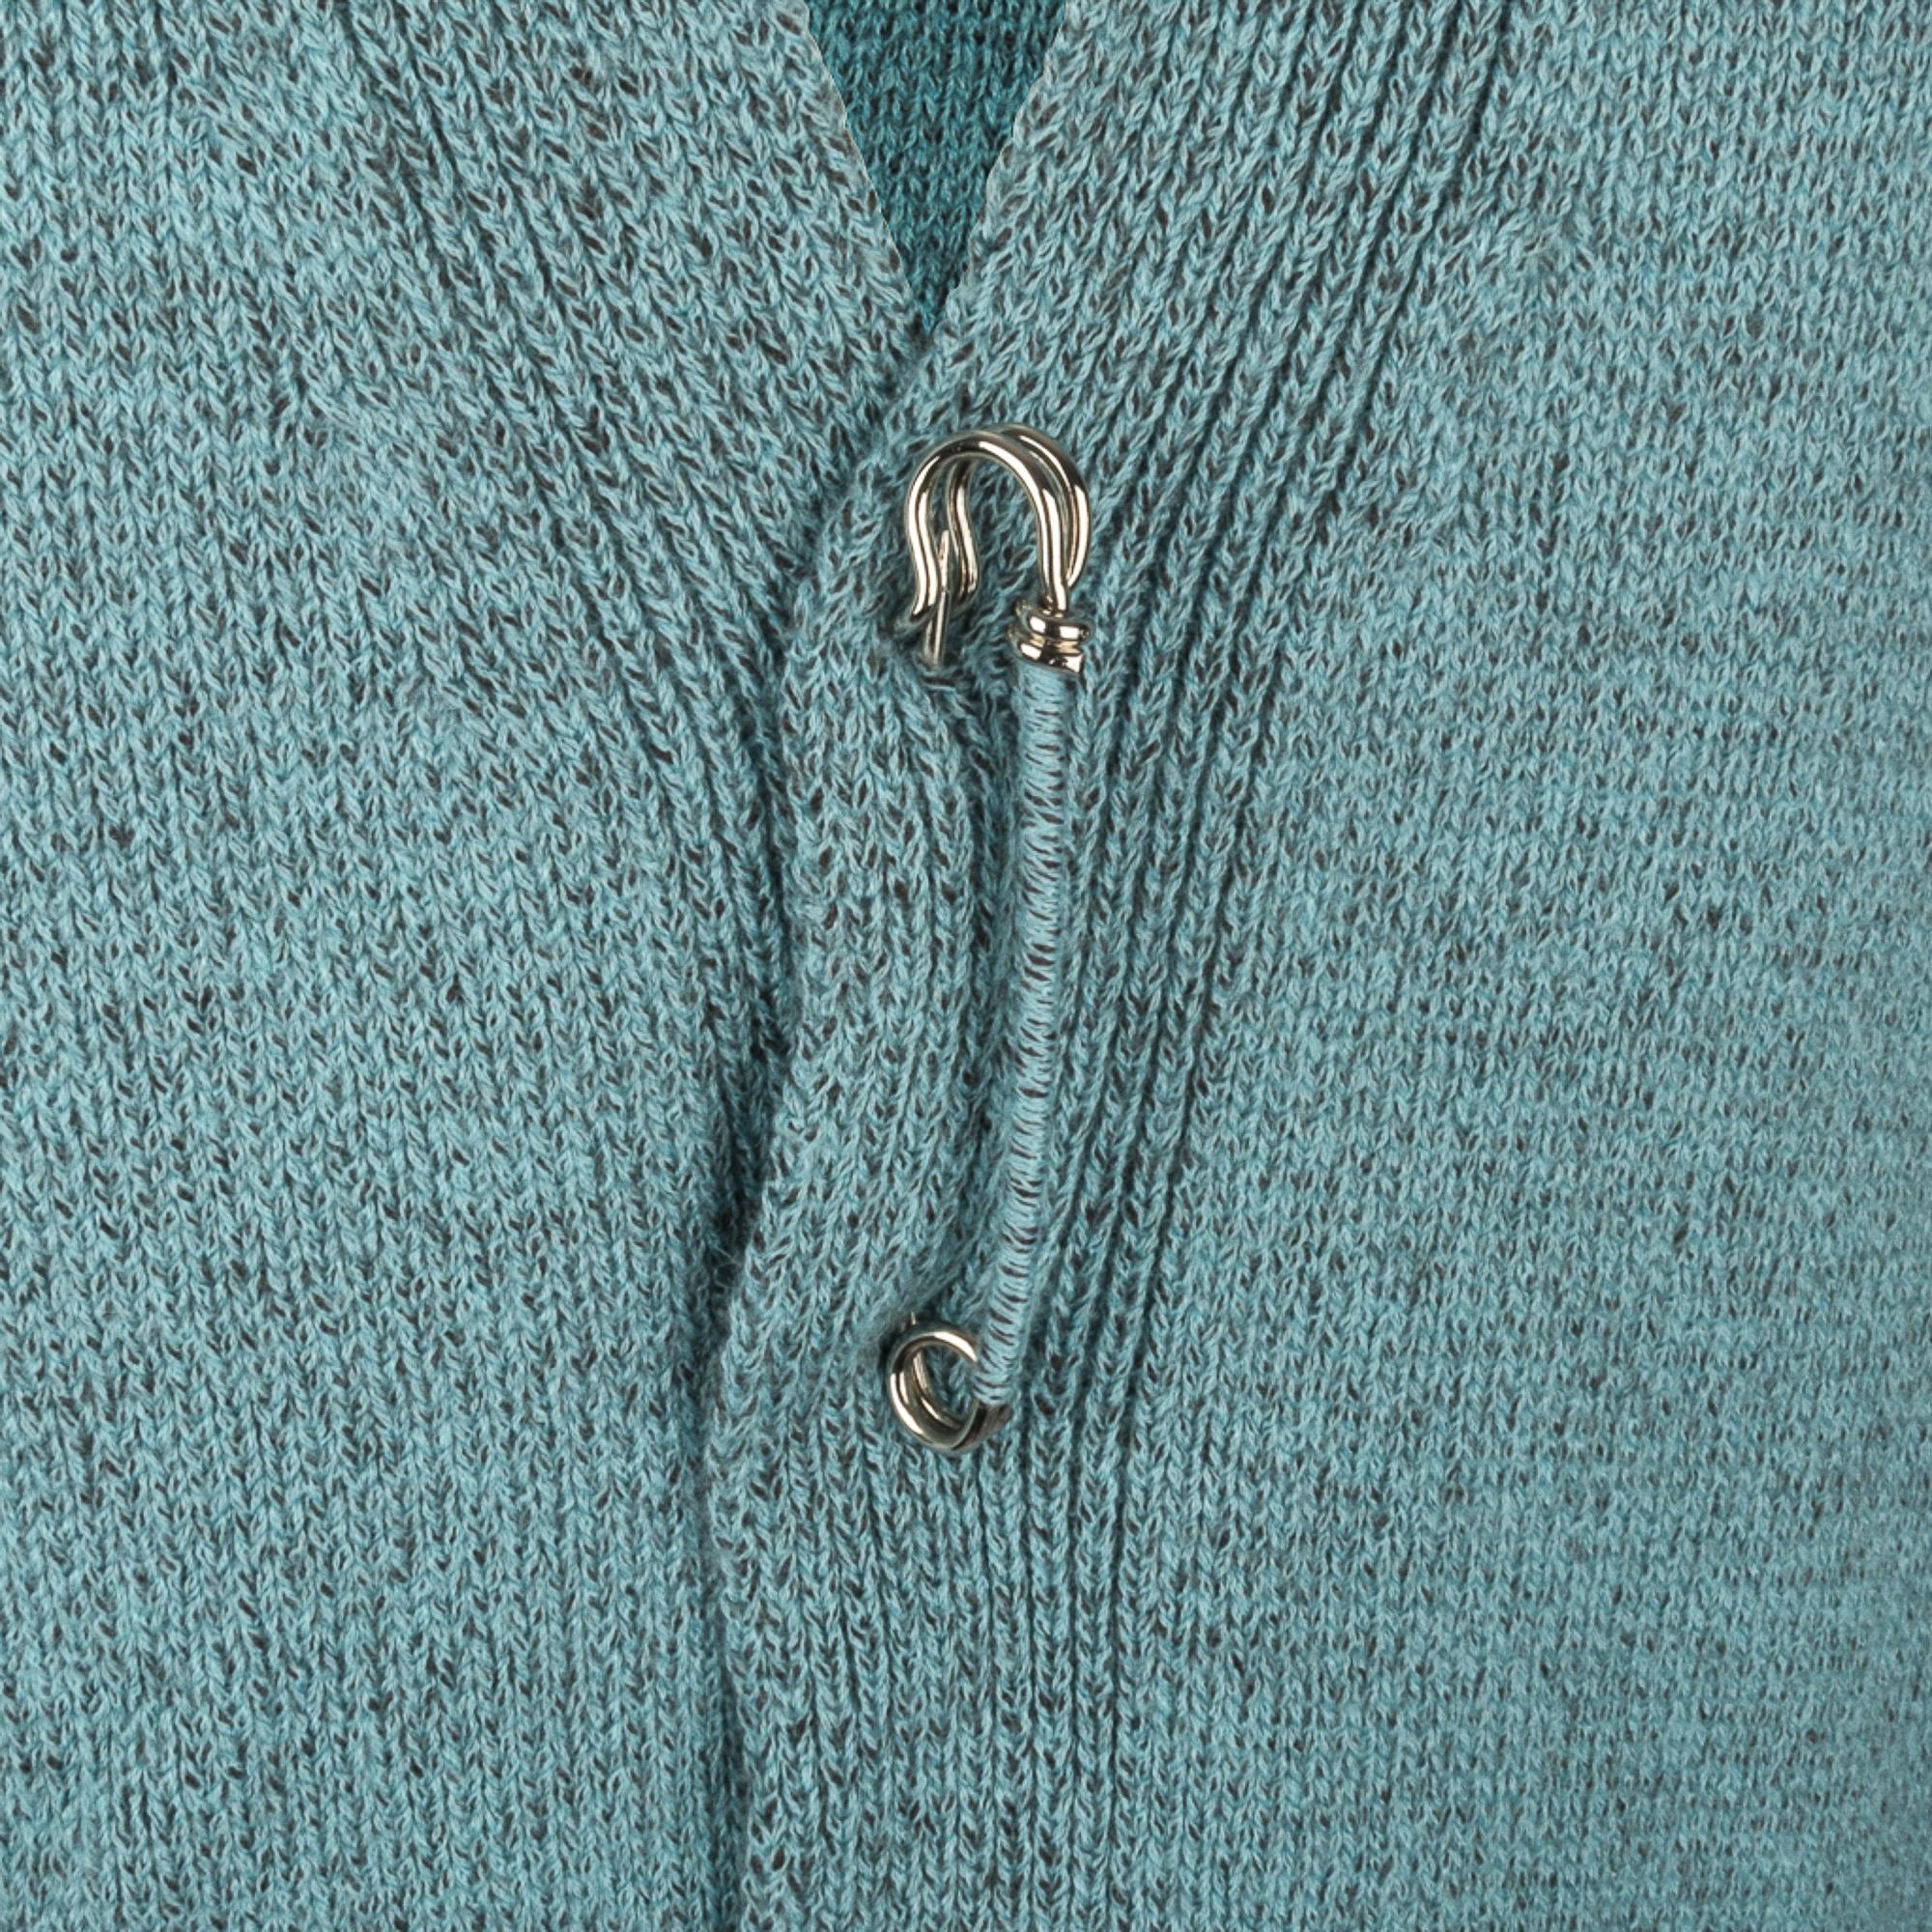 Mightychic offers a Malo deep V neck pullover cashmere sweater.
Fabulous, soft muted blue flecked with brown.
Over sized safety pin in front.
Sleeves have a knit detail down the sides. Drop Shoulder.
Fabric is cashmere.
final sale
Private and